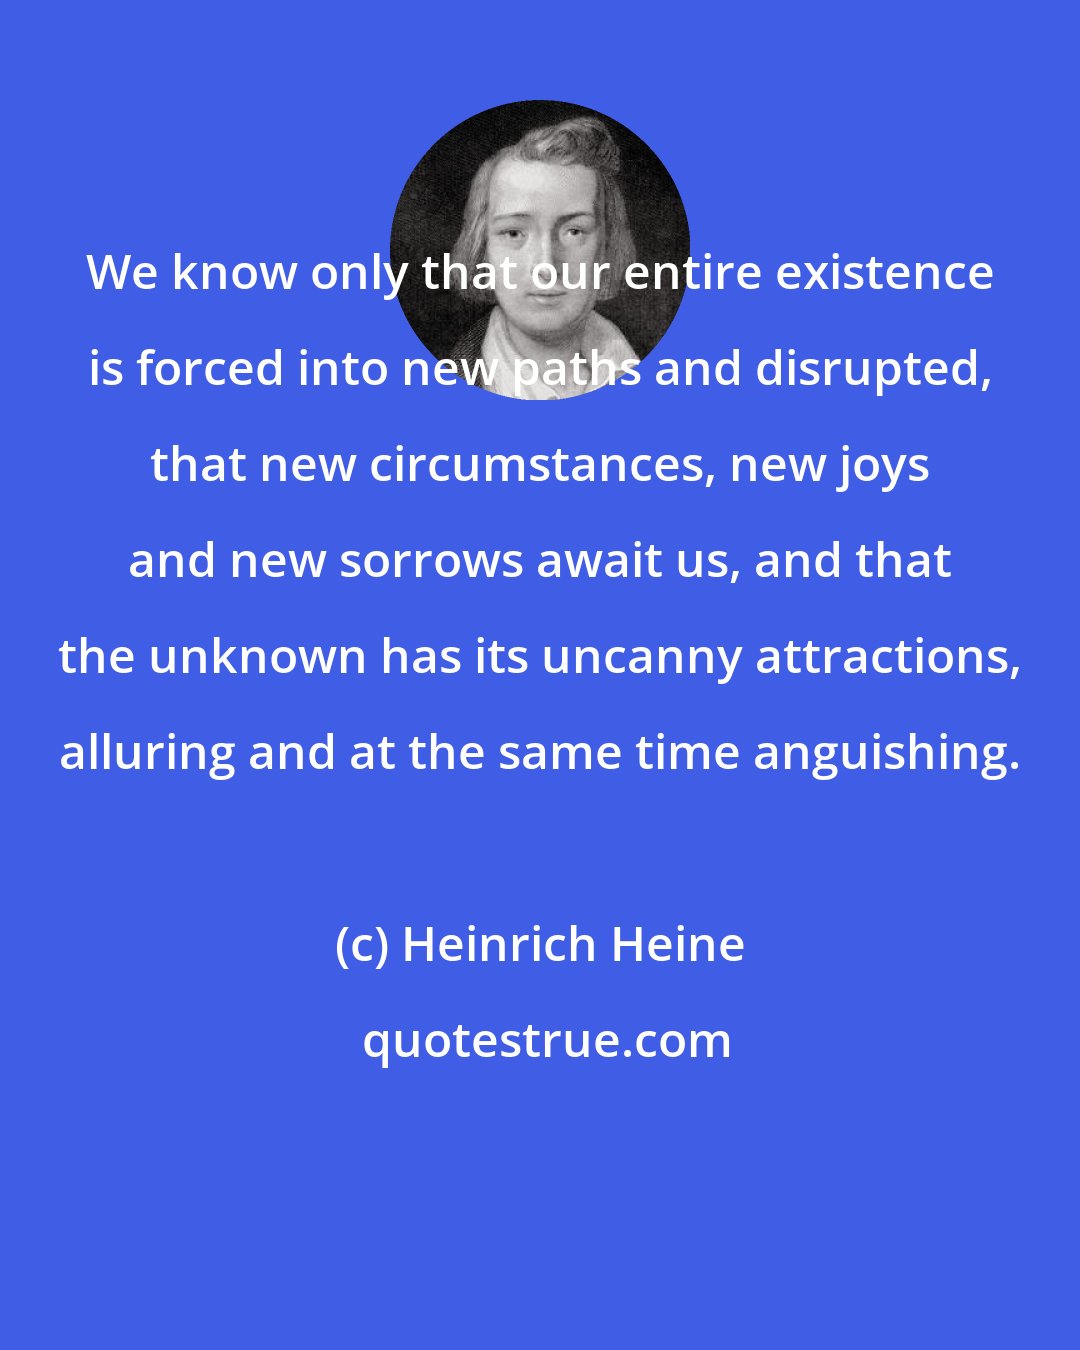 Heinrich Heine: We know only that our entire existence is forced into new paths and disrupted, that new circumstances, new joys and new sorrows await us, and that the unknown has its uncanny attractions, alluring and at the same time anguishing.